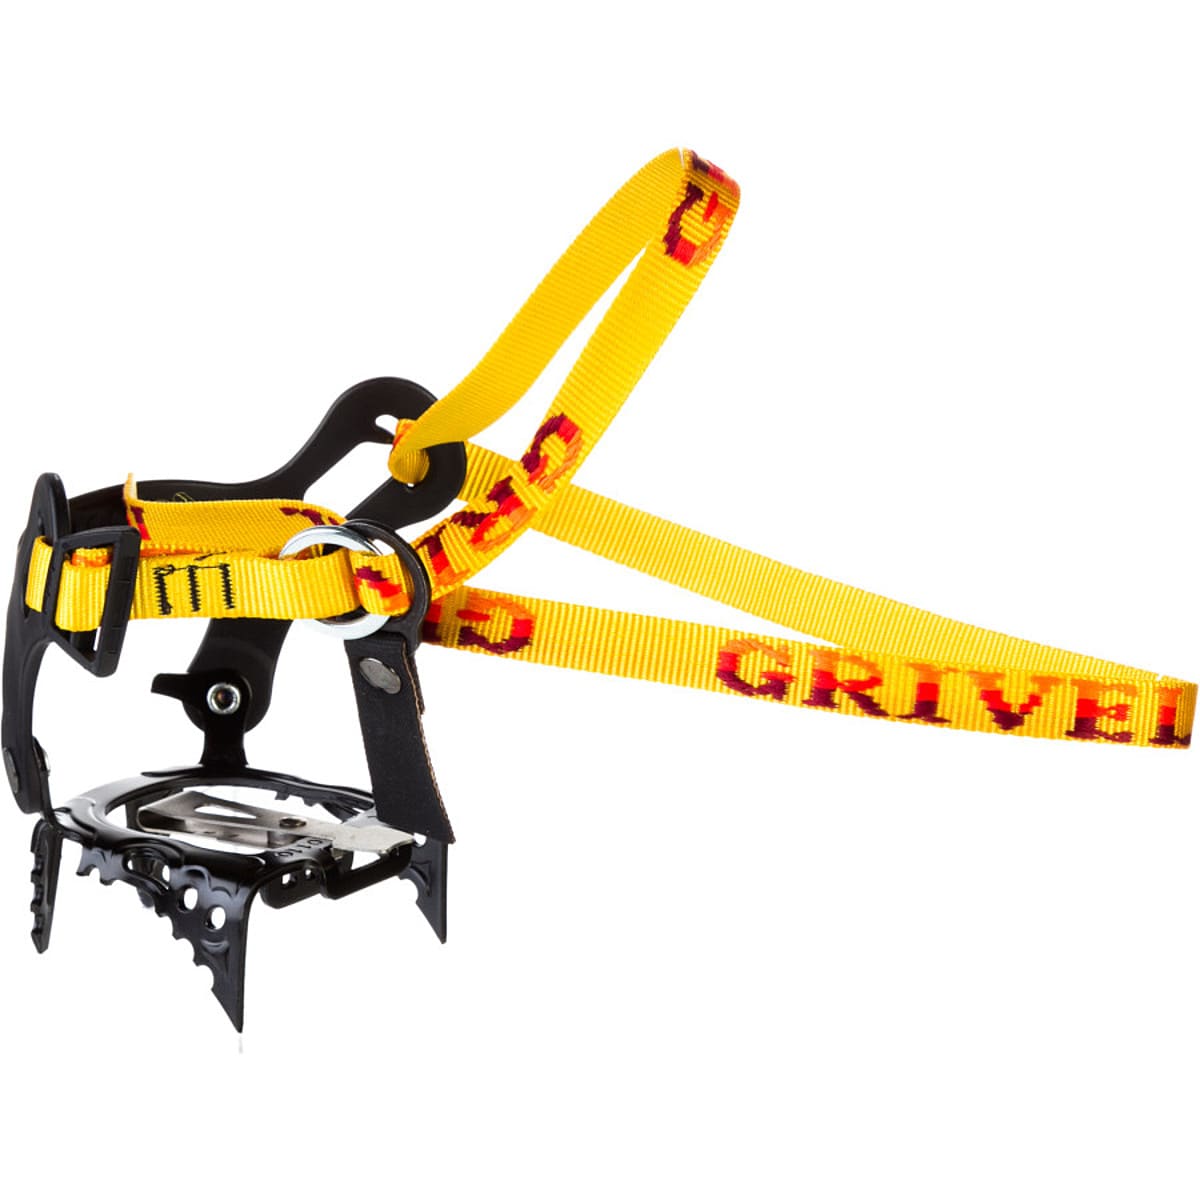 Grivel G12 Crampon Spare Parts - Back